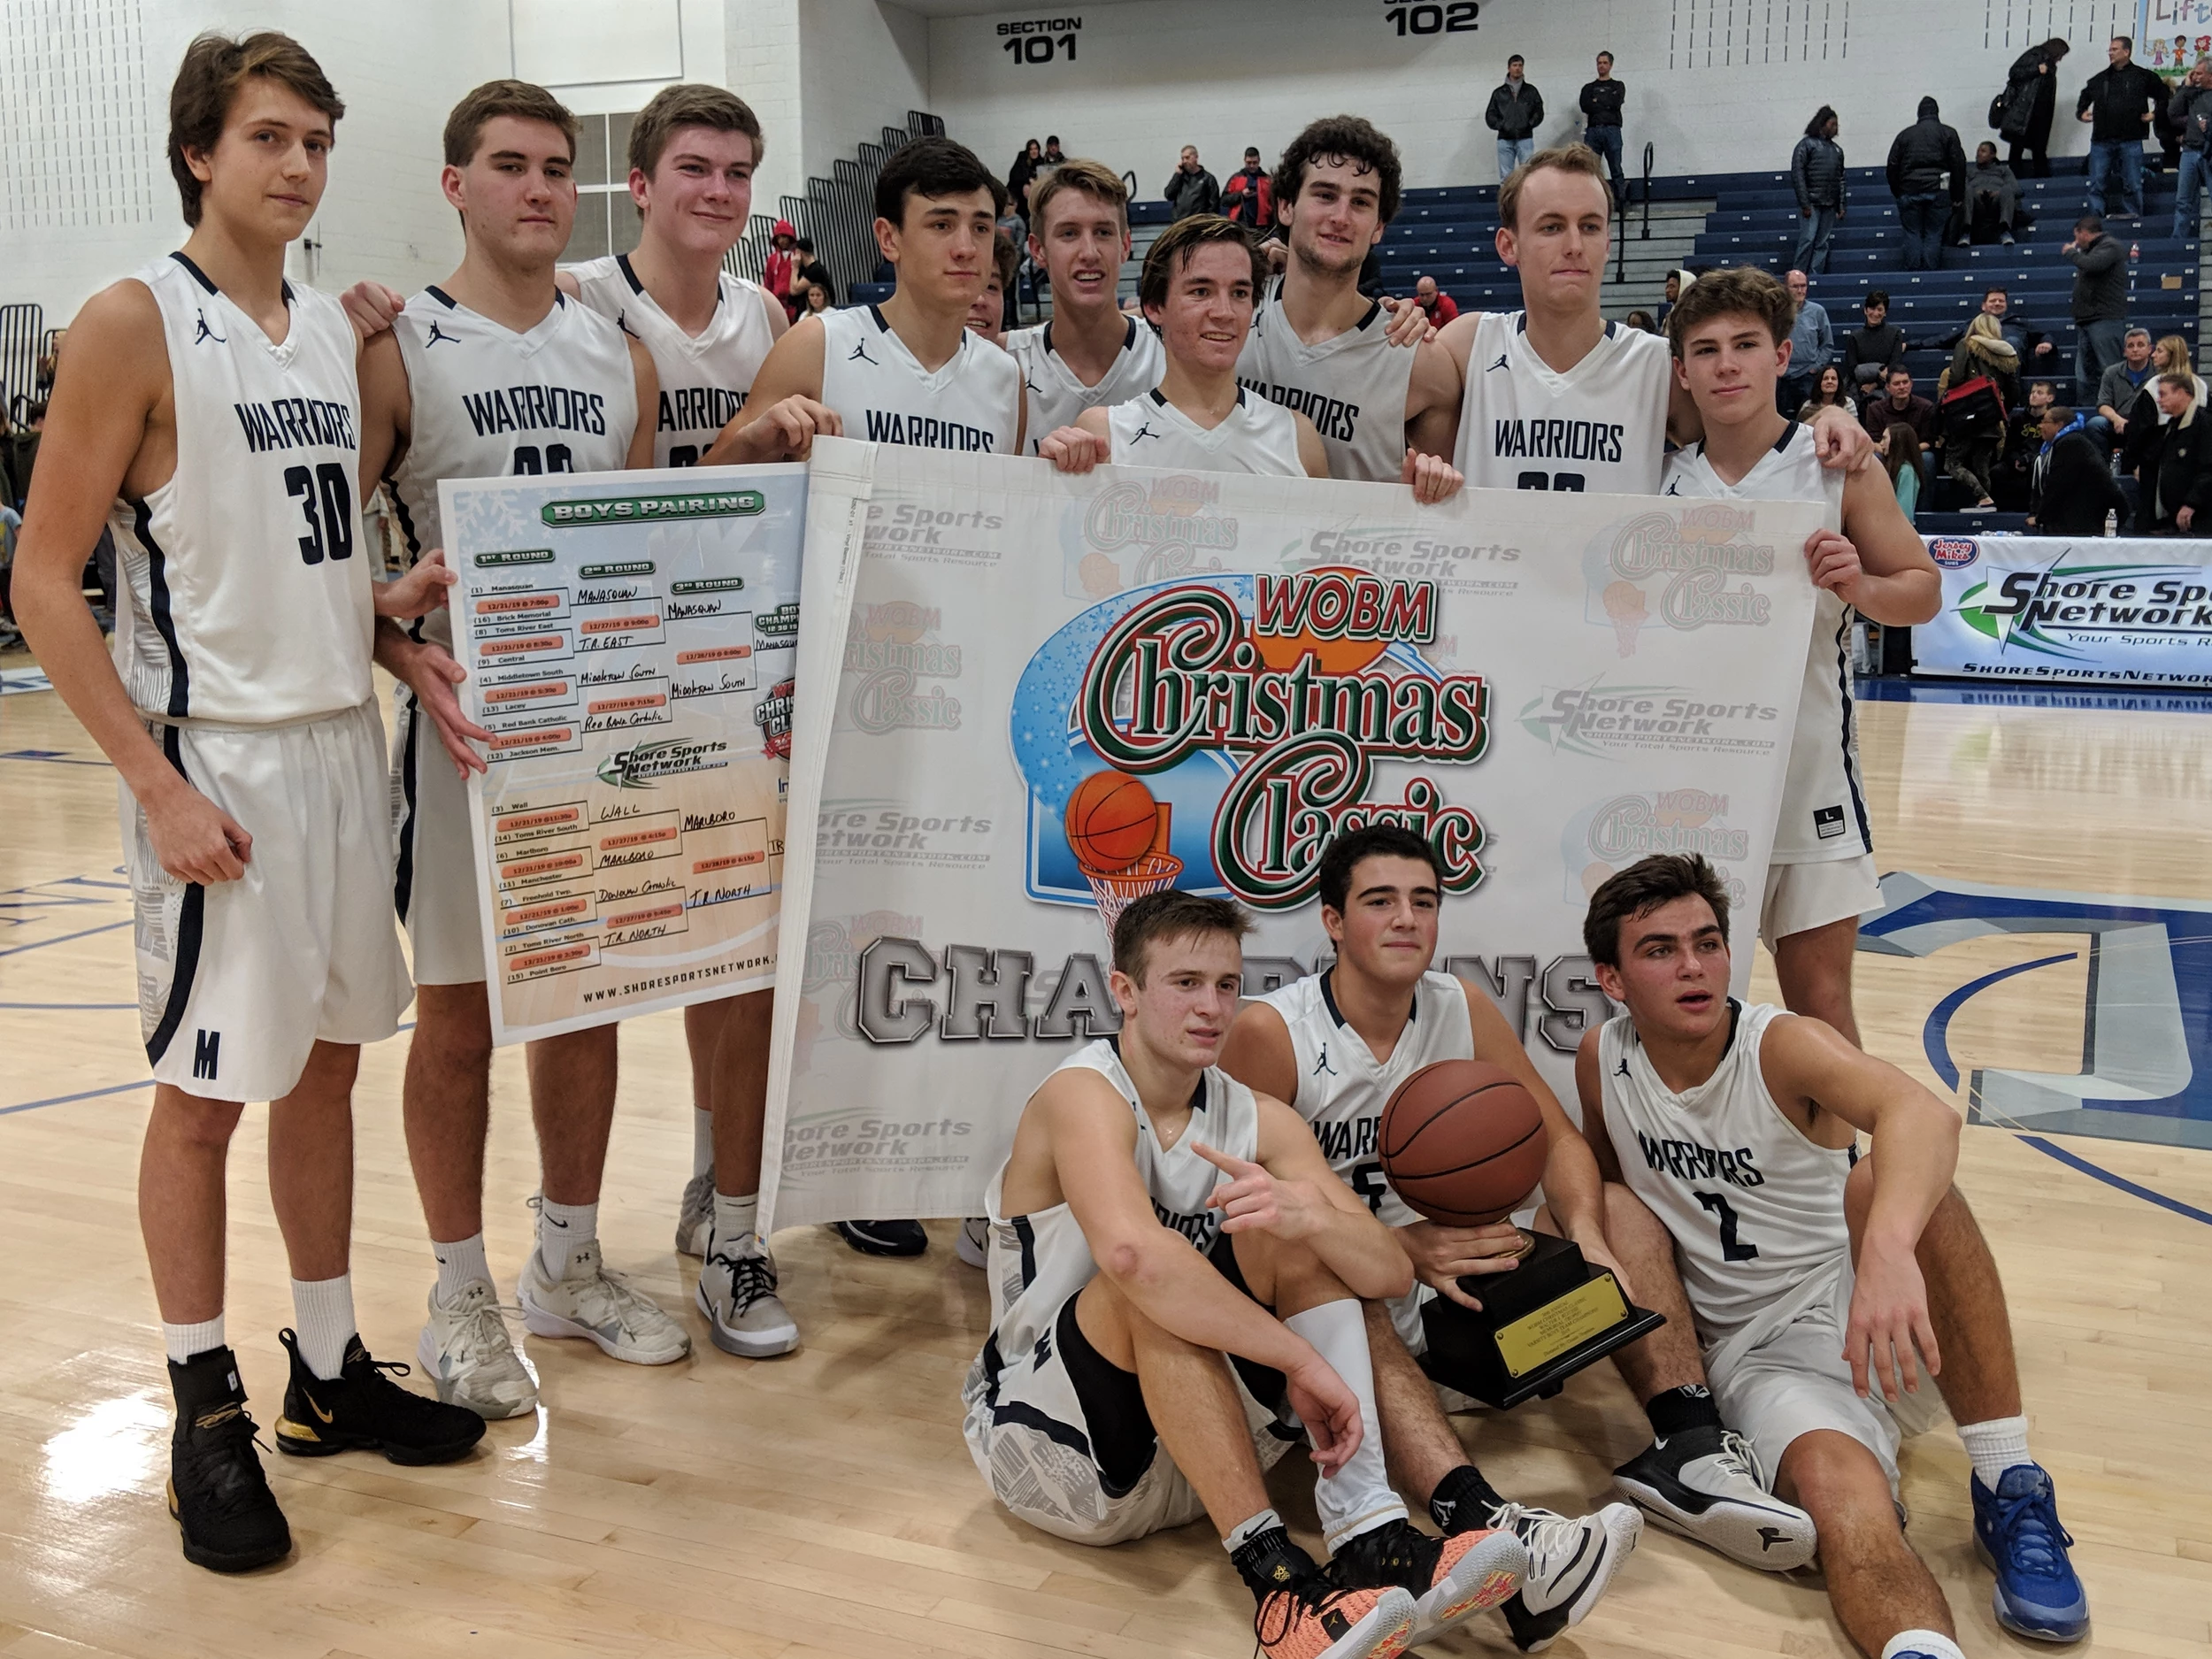 Boys Basketball – Manasquan Claims Shore Supremacy in WOBM Win Over TR North